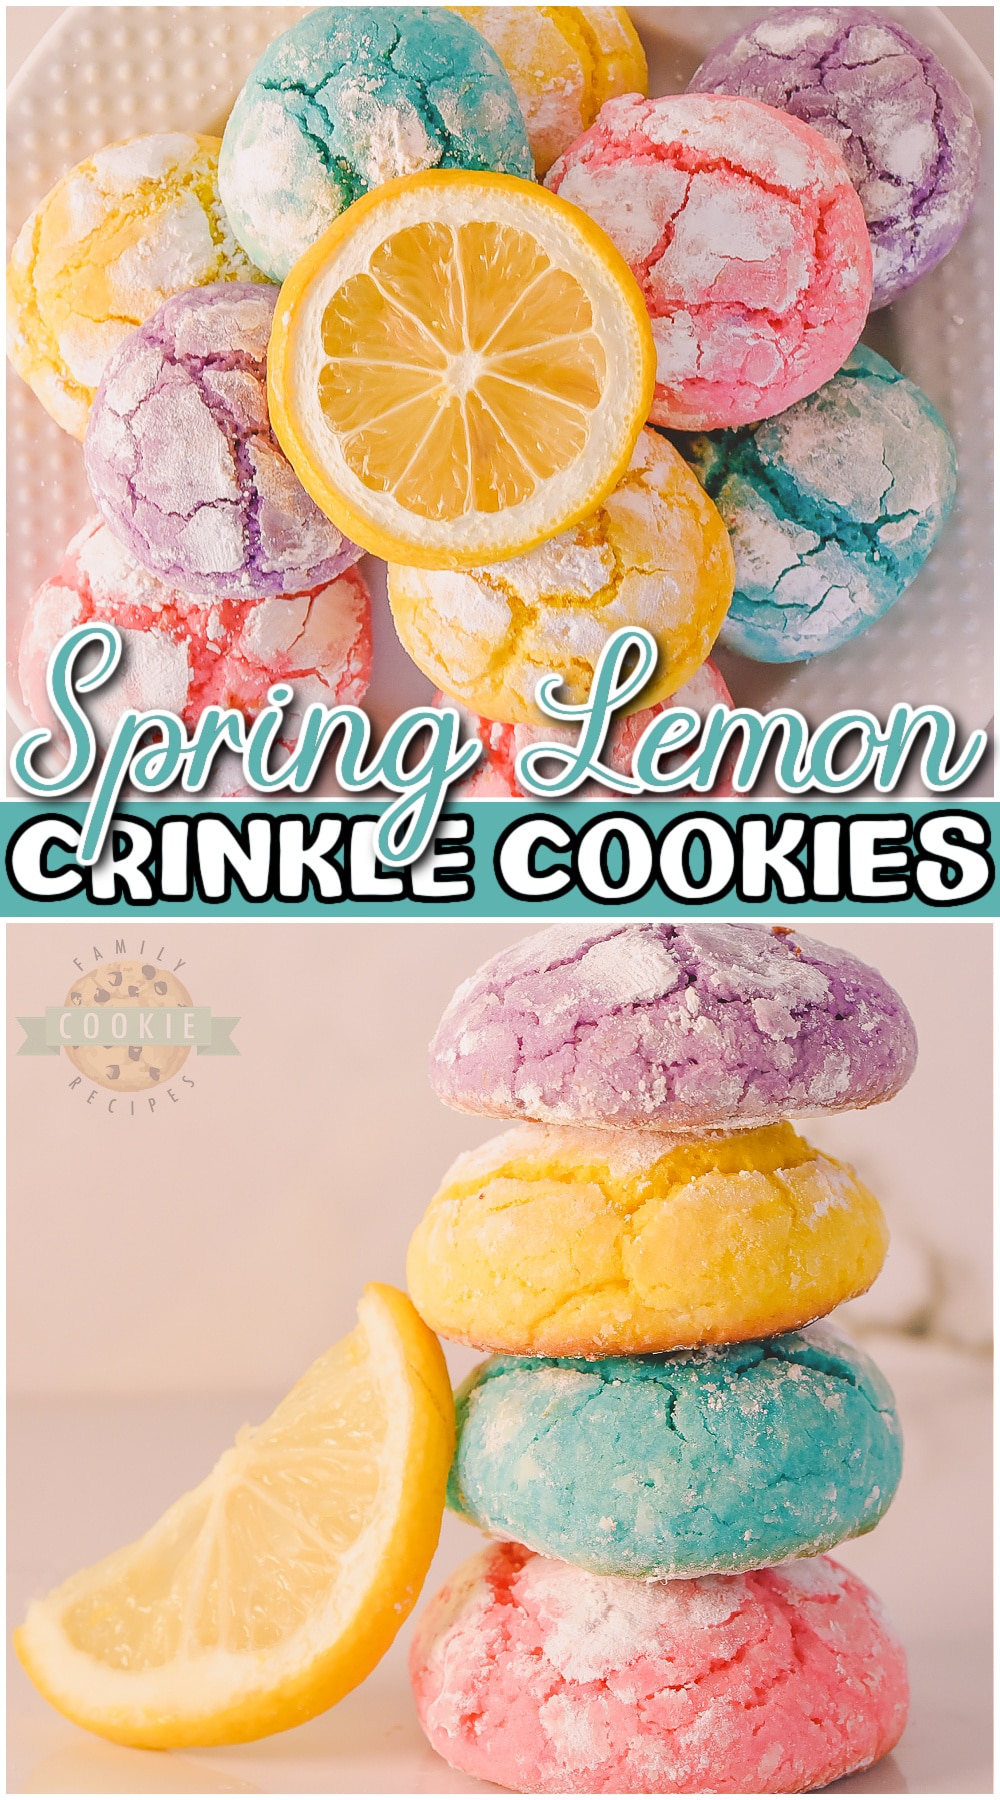 Spring Lemon Crinkle Cookies with amazing lemon flavor & vibrant, festive colors! Homemade Lemon crinkle cookies are perfect for Easter!